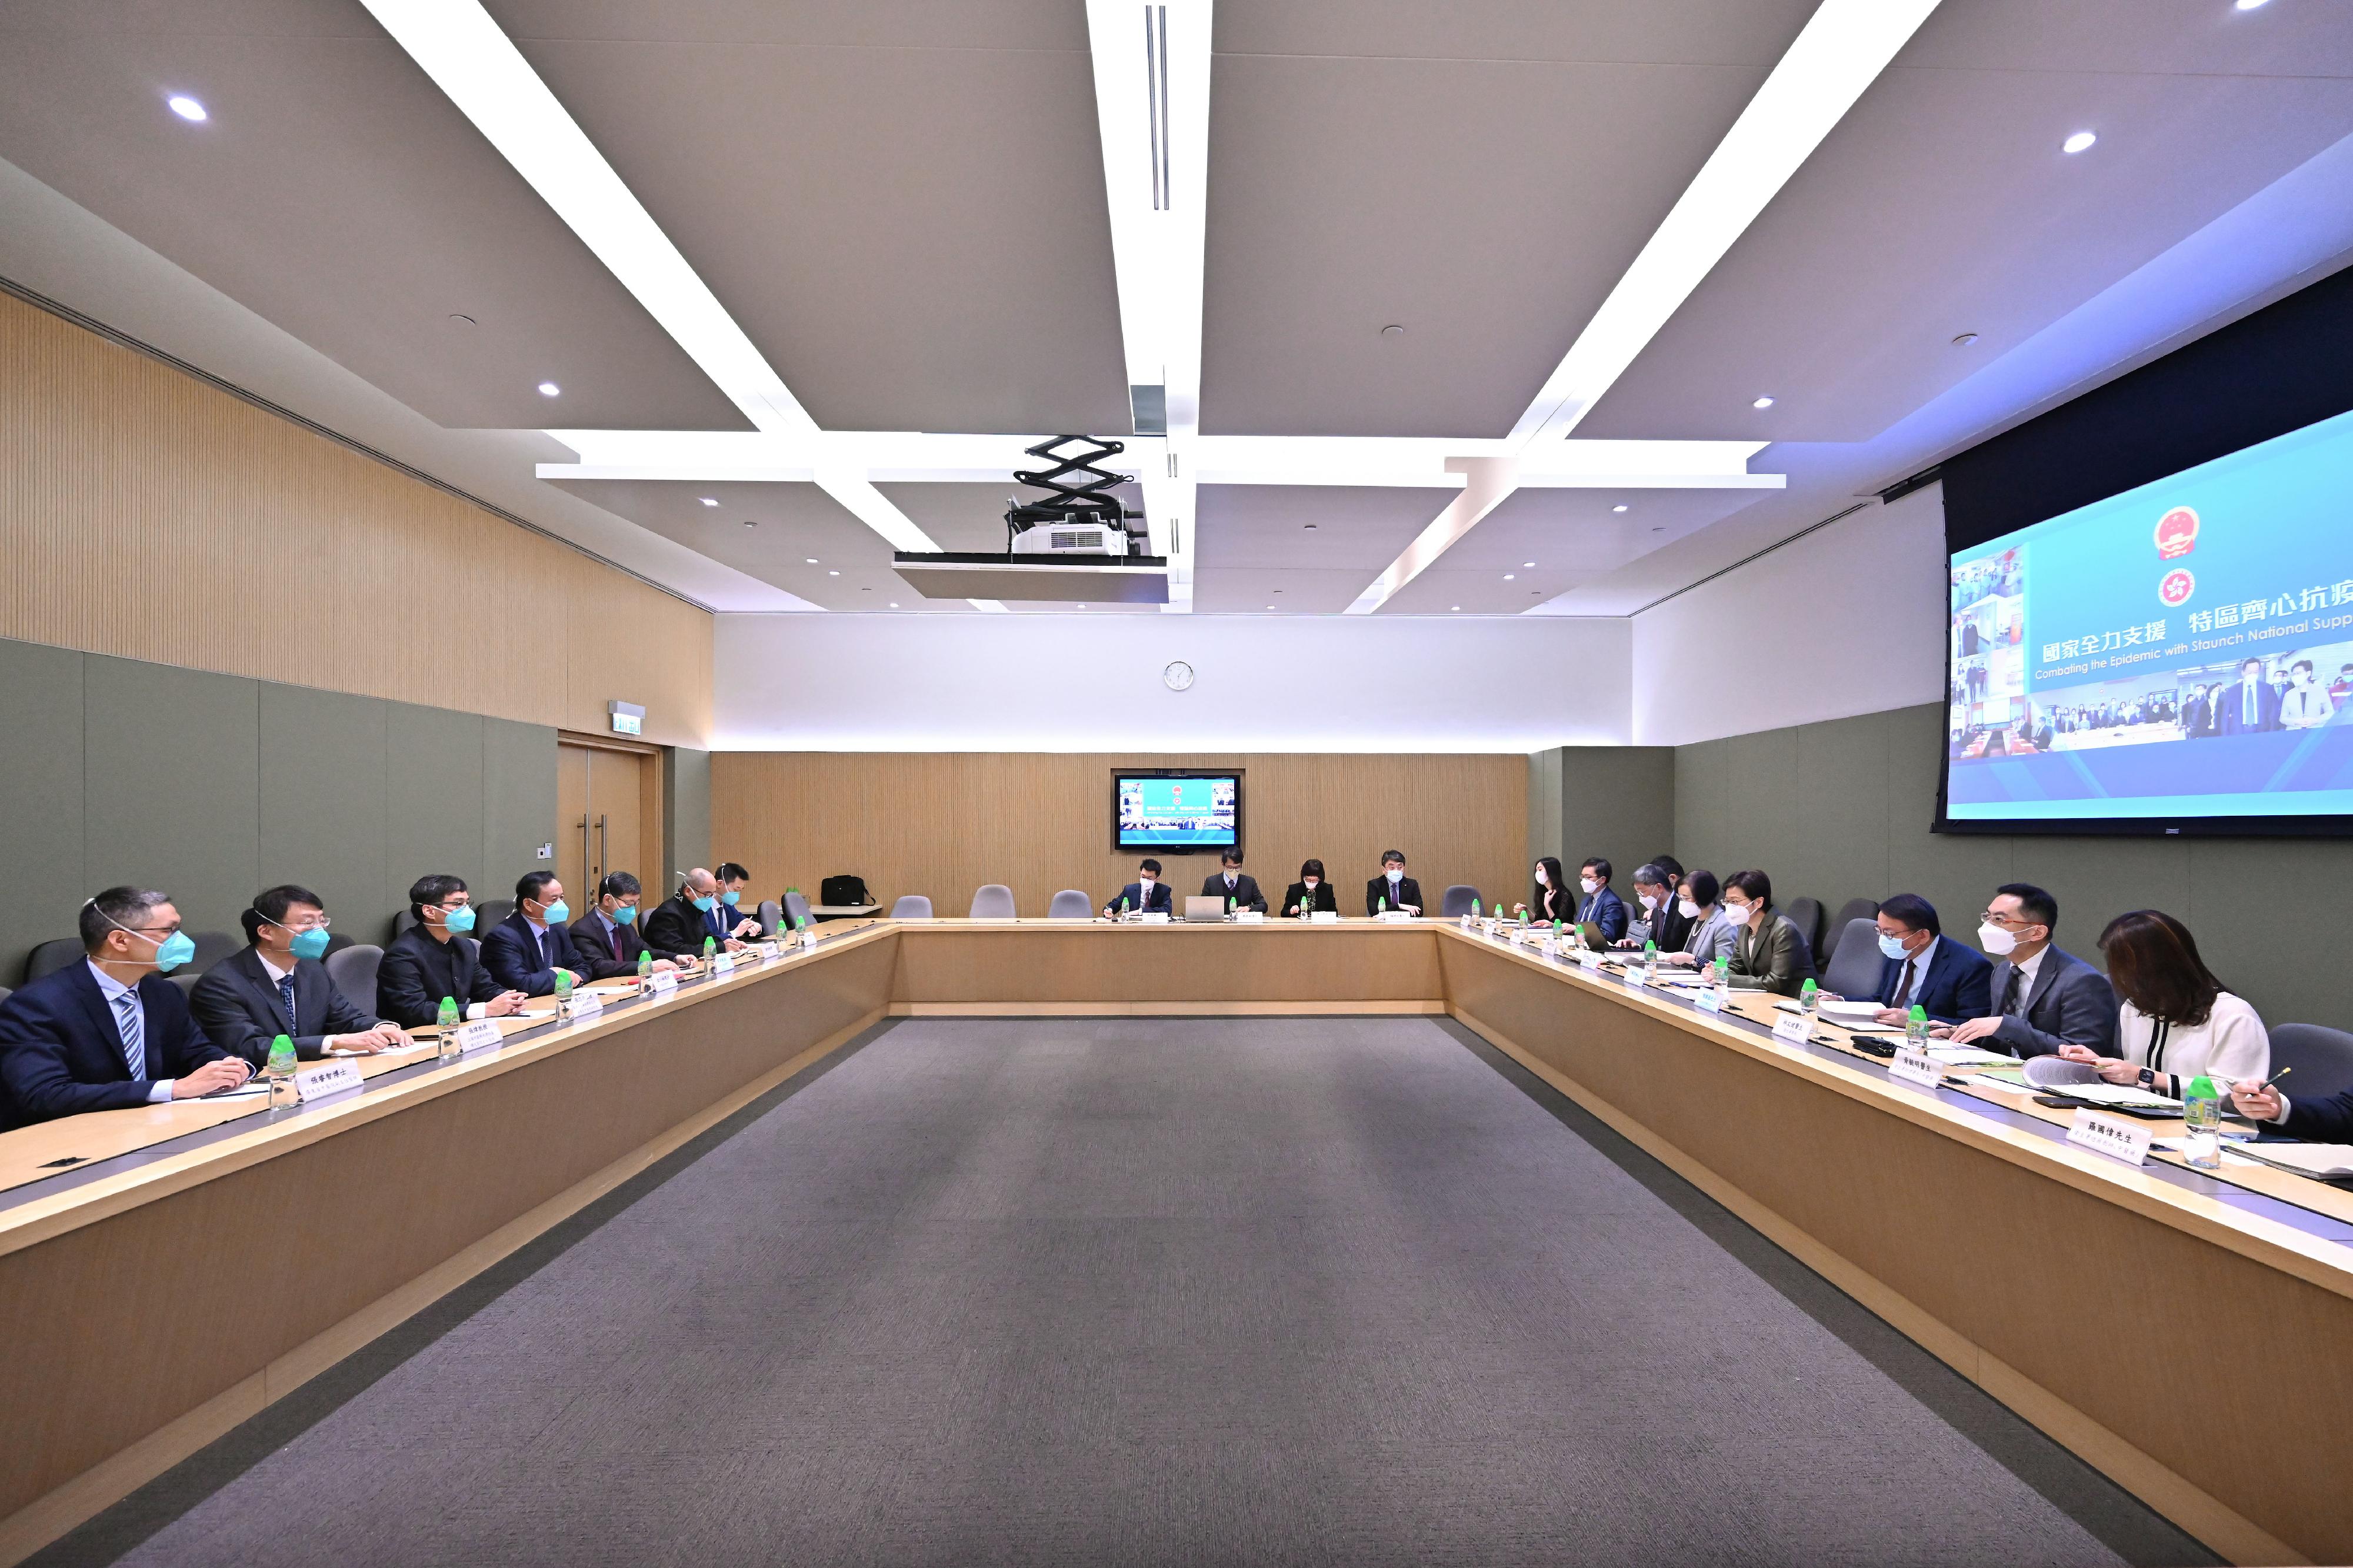 The Chief Executive, Mrs Carrie Lam (fourth right), today (April 7) met with the expert group led by the leader of the Mainland Chinese medicine expert group of the Central Authorities, Mr Tong Xiaolin (fourth left). Also present was the Secretary for Food and Health, Professor Sophia Chan (fifth right).